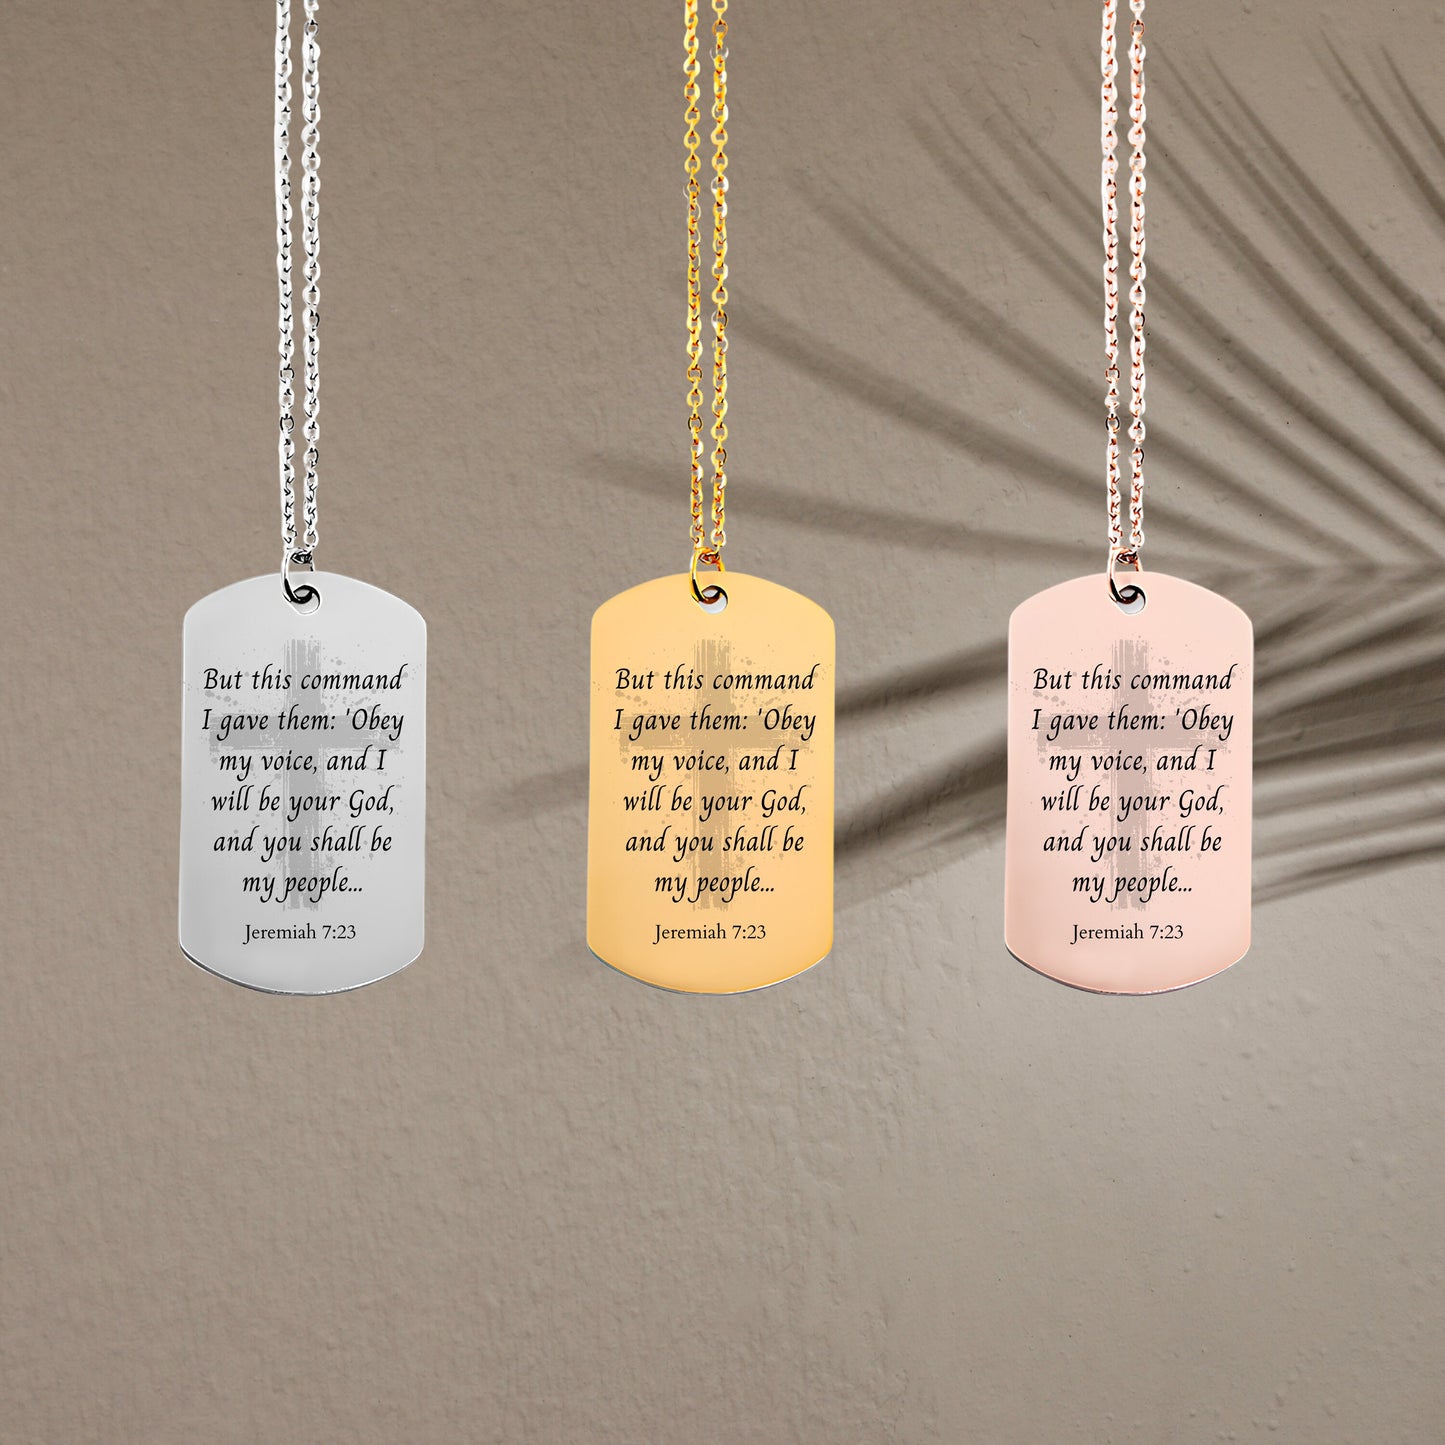 Jeremiah 7 23 quote necklace - Personalizable Jewelry